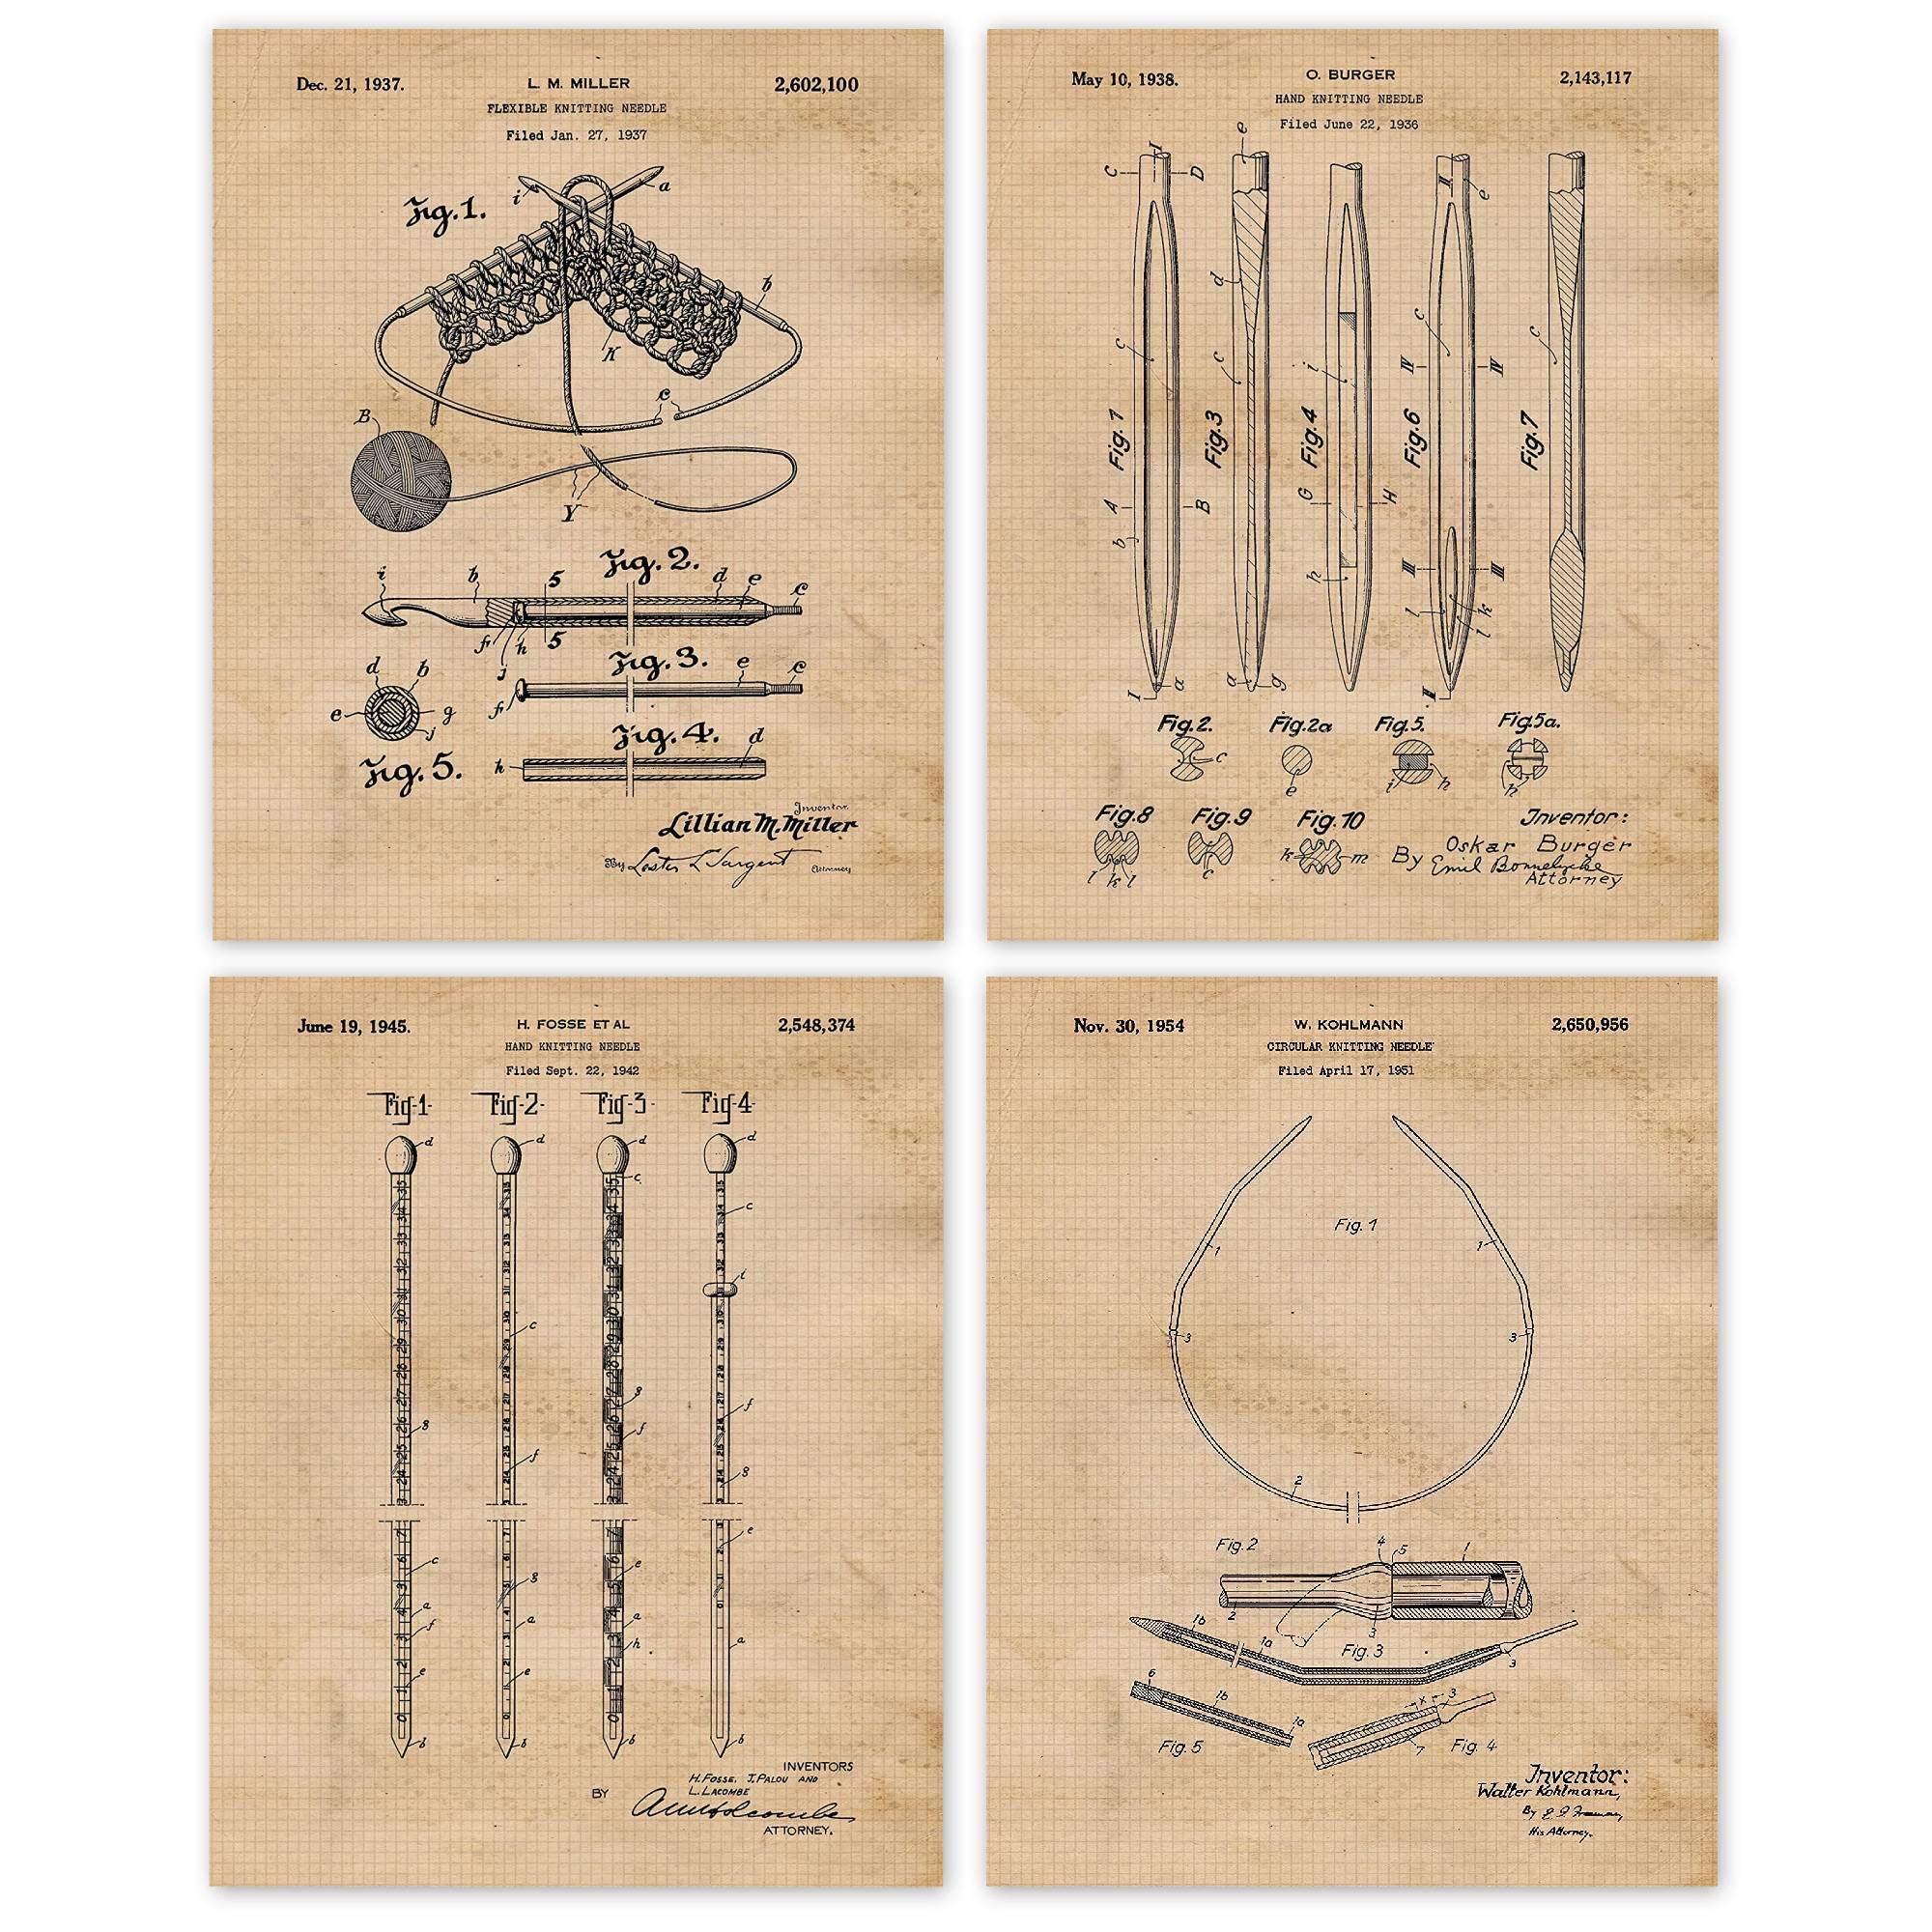 Vintage Knitting Tools Patent Prints, 4 (8x10) Unframed Photos, Wall Art Decor Gifts Under 20 for Home Craftsman Office Hobby Craft Studio Lounge Garage Student Teacher Fashion Sewing Engineer Design